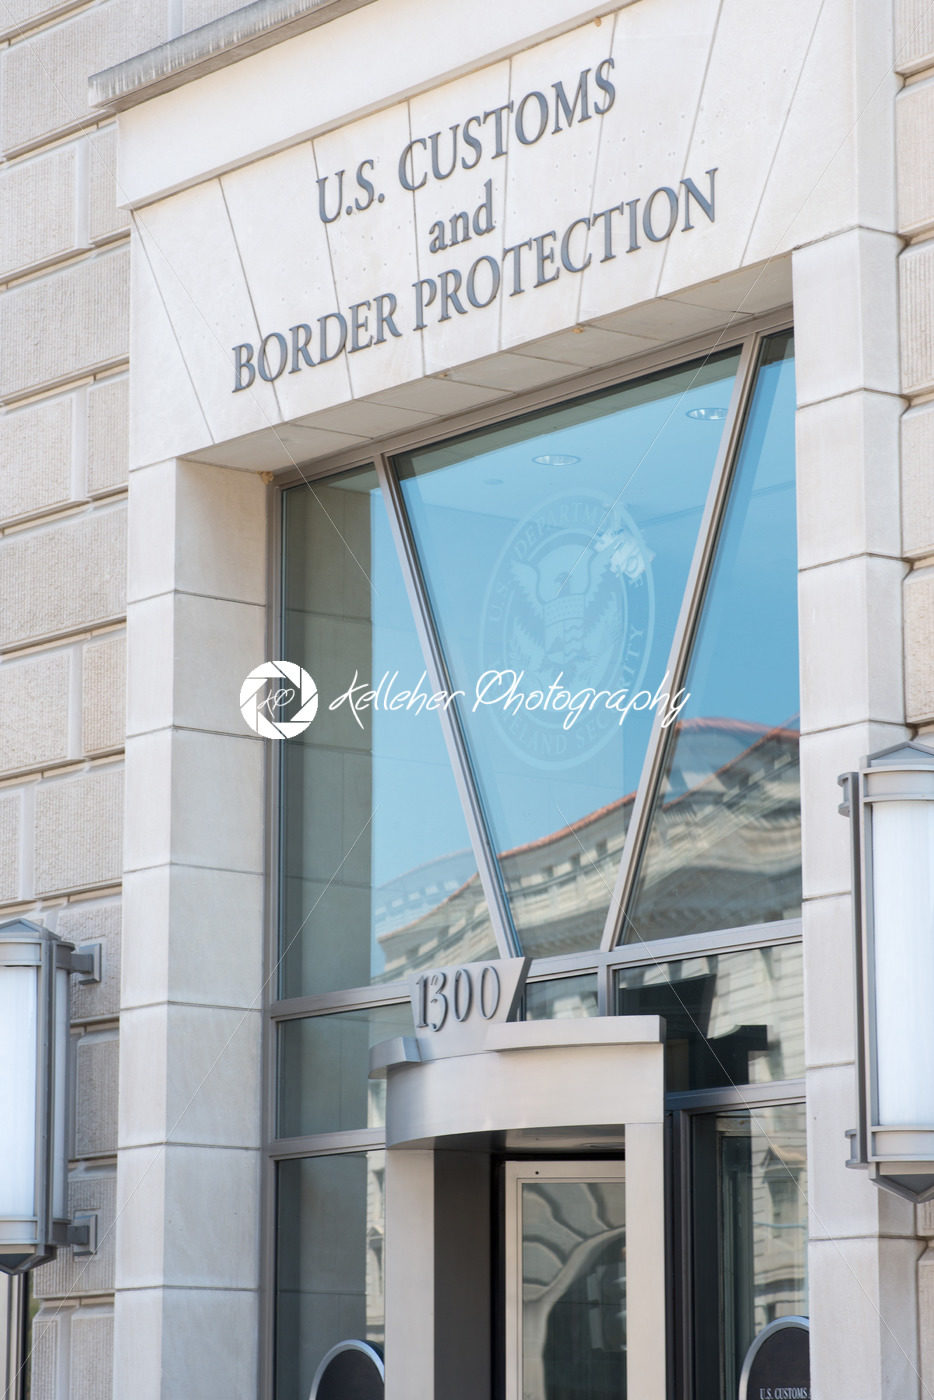 WASHINGTON, DISTRICT OF COLUMBIA – APRIL 14: View of the U.S. Customs and Border Protection Building on April 14, 2017 - Kelleher Photography Store